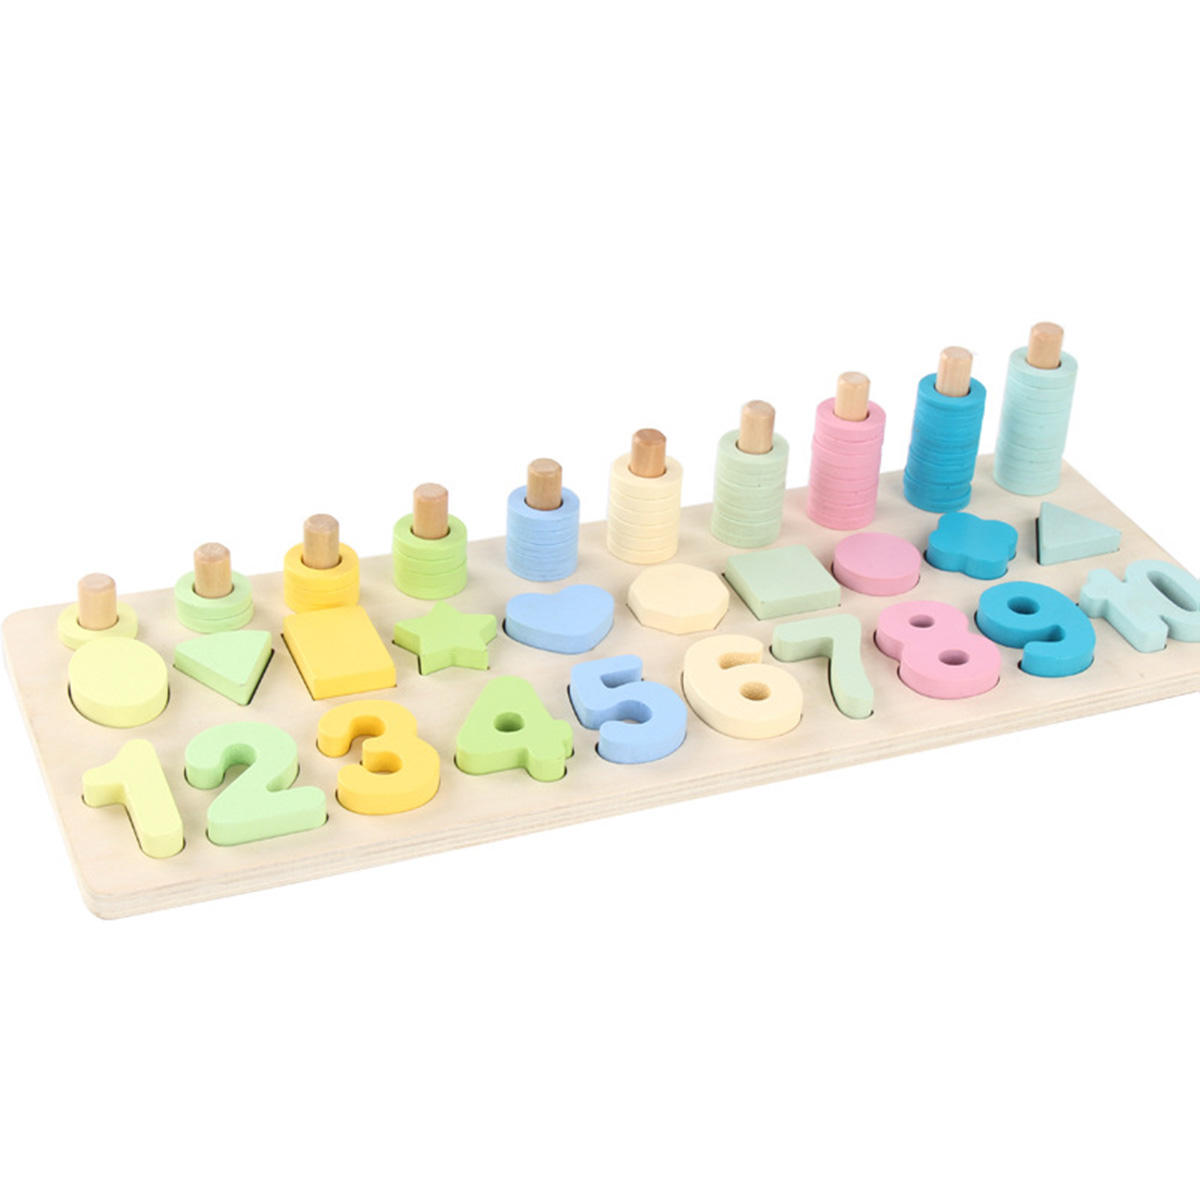 Preschool-Learning-for-Montessori-Math-Toys-Counting-Board-Digital-Shape-Pairing-1590390